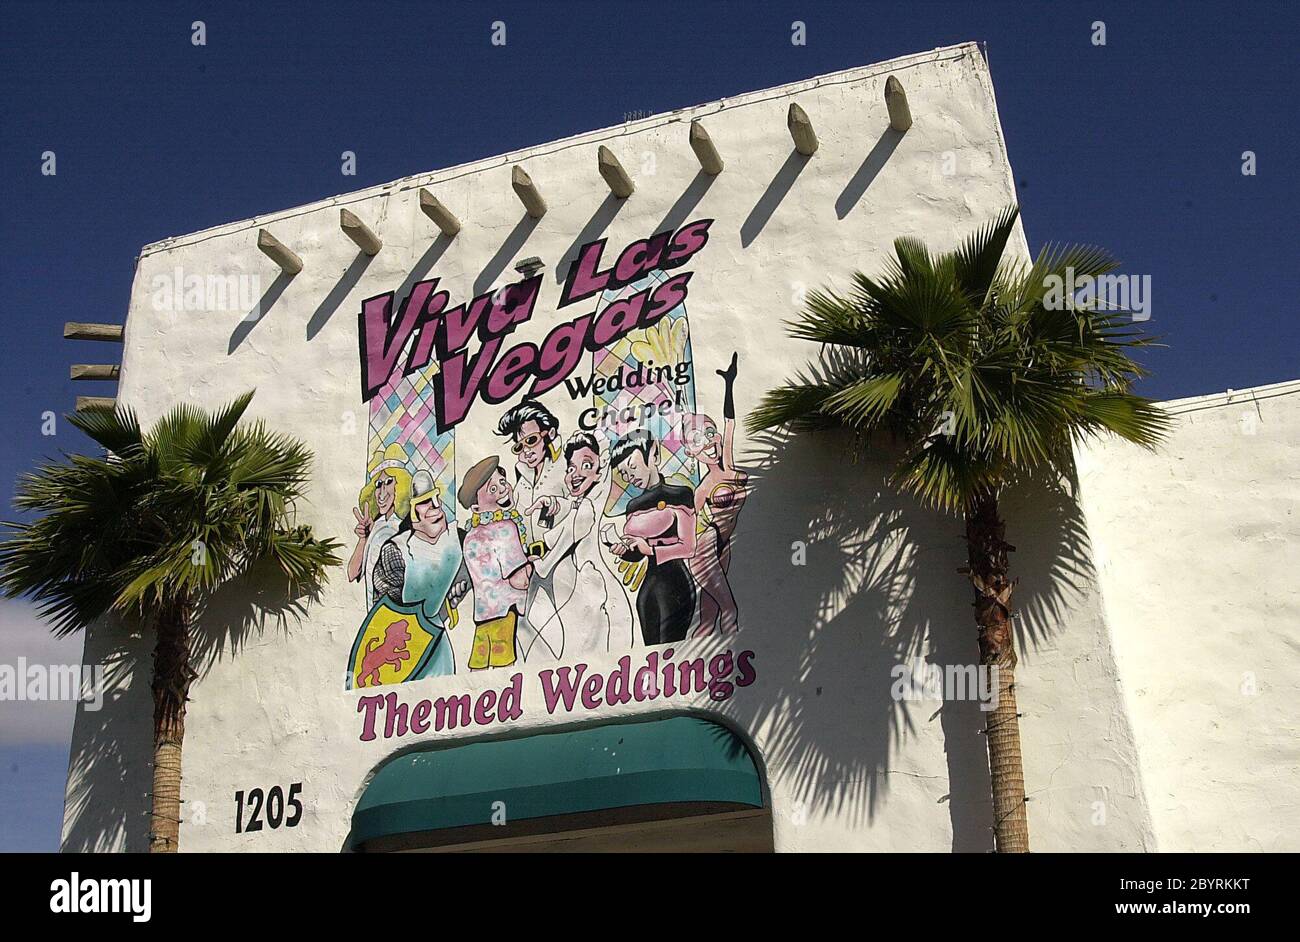 Wedding Chapel Las Vegsa 622 Hotel and most important places in Las Vegas The most beautiful place in Las Vegas Stock Photo